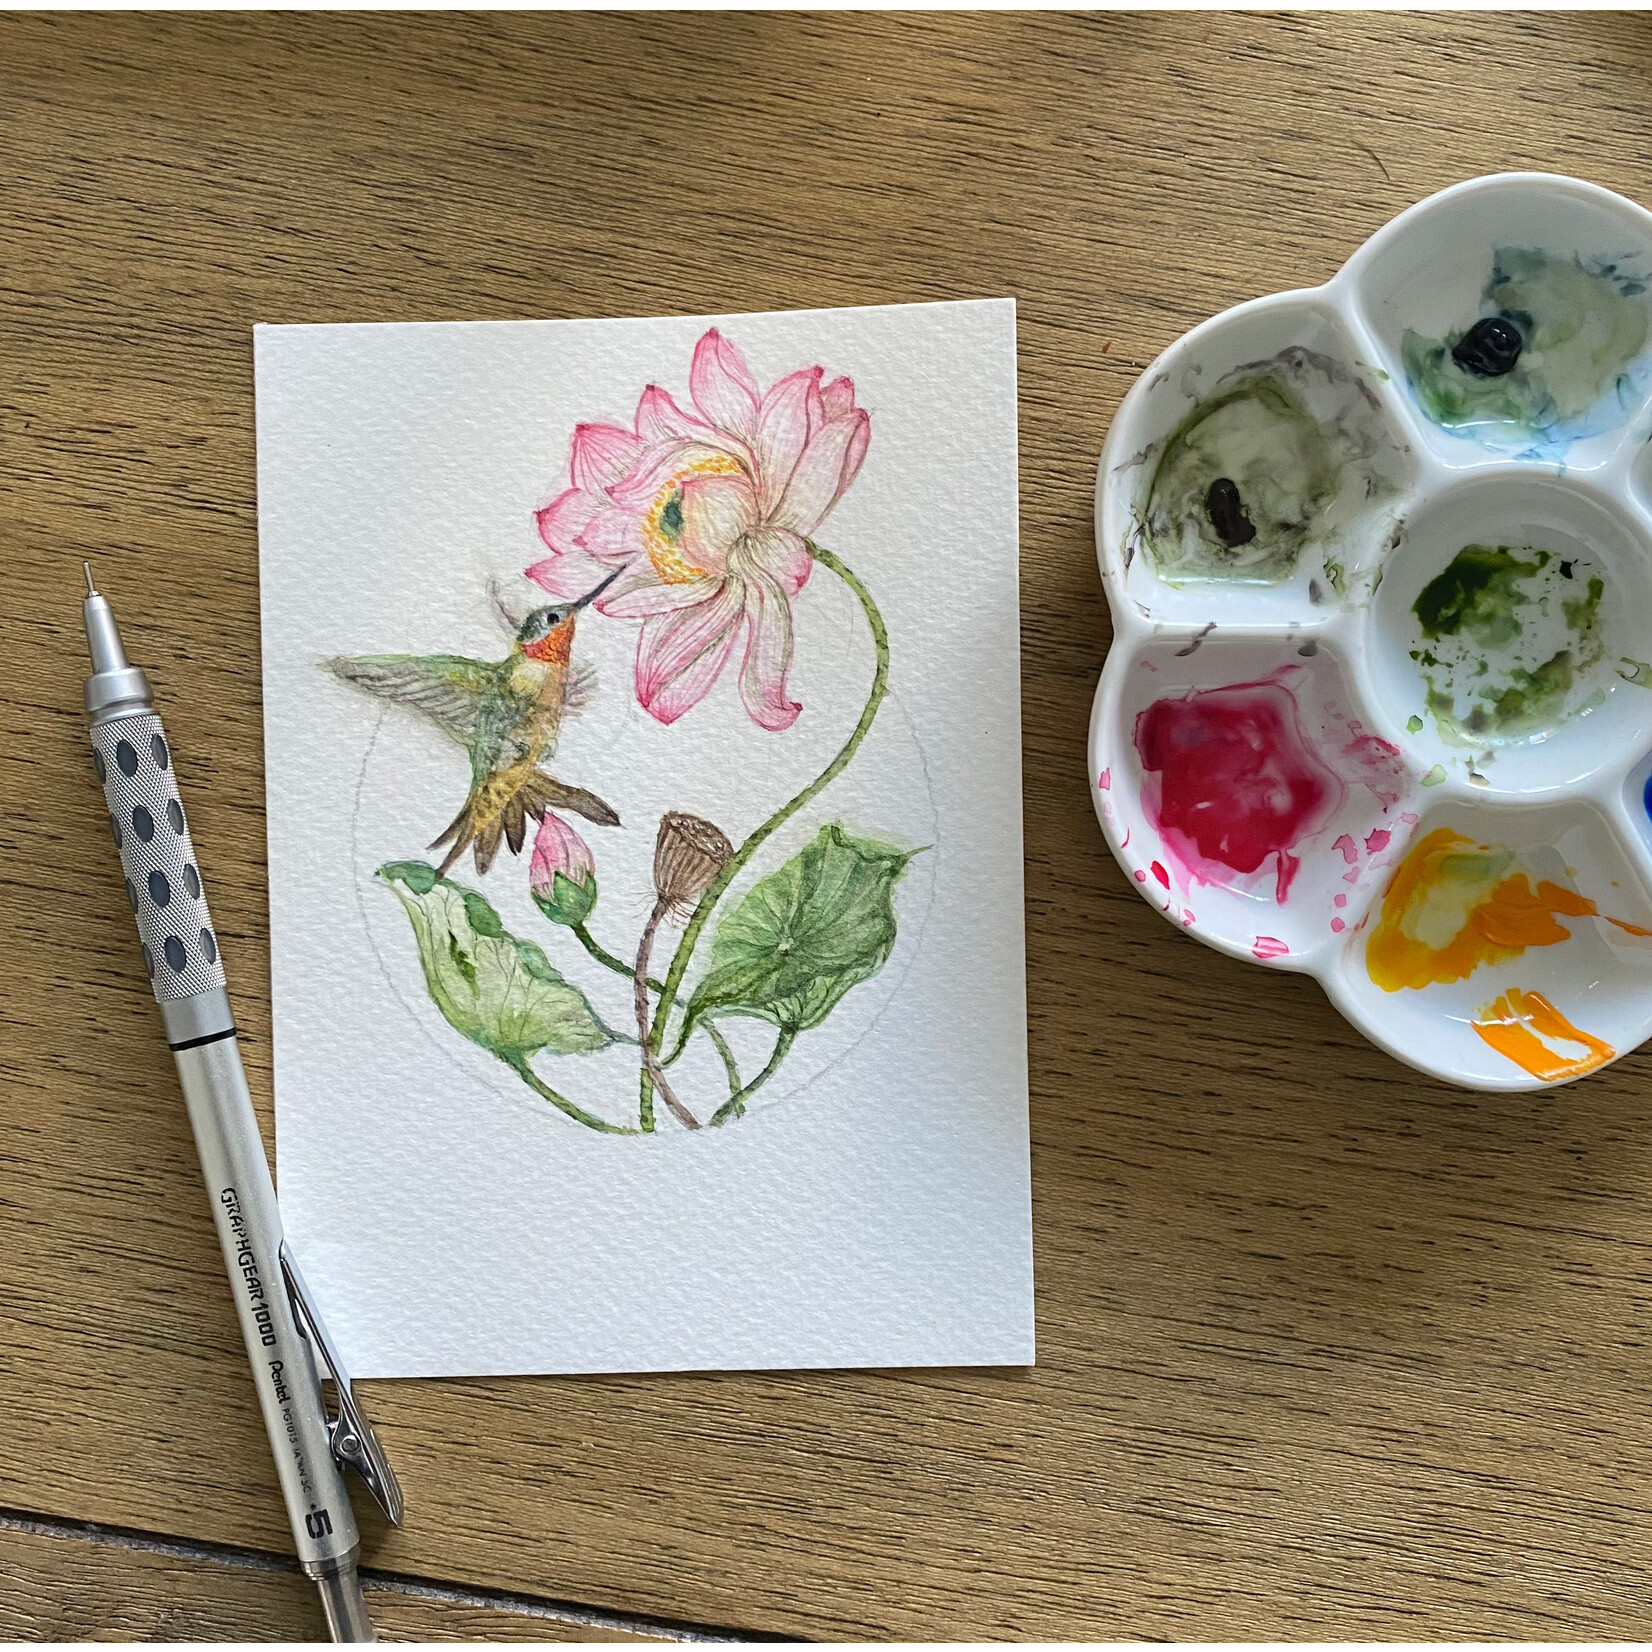 My Muses Card Shop Artful Watercolors ~ A Beginner's Watercolor Workshop with Abhi